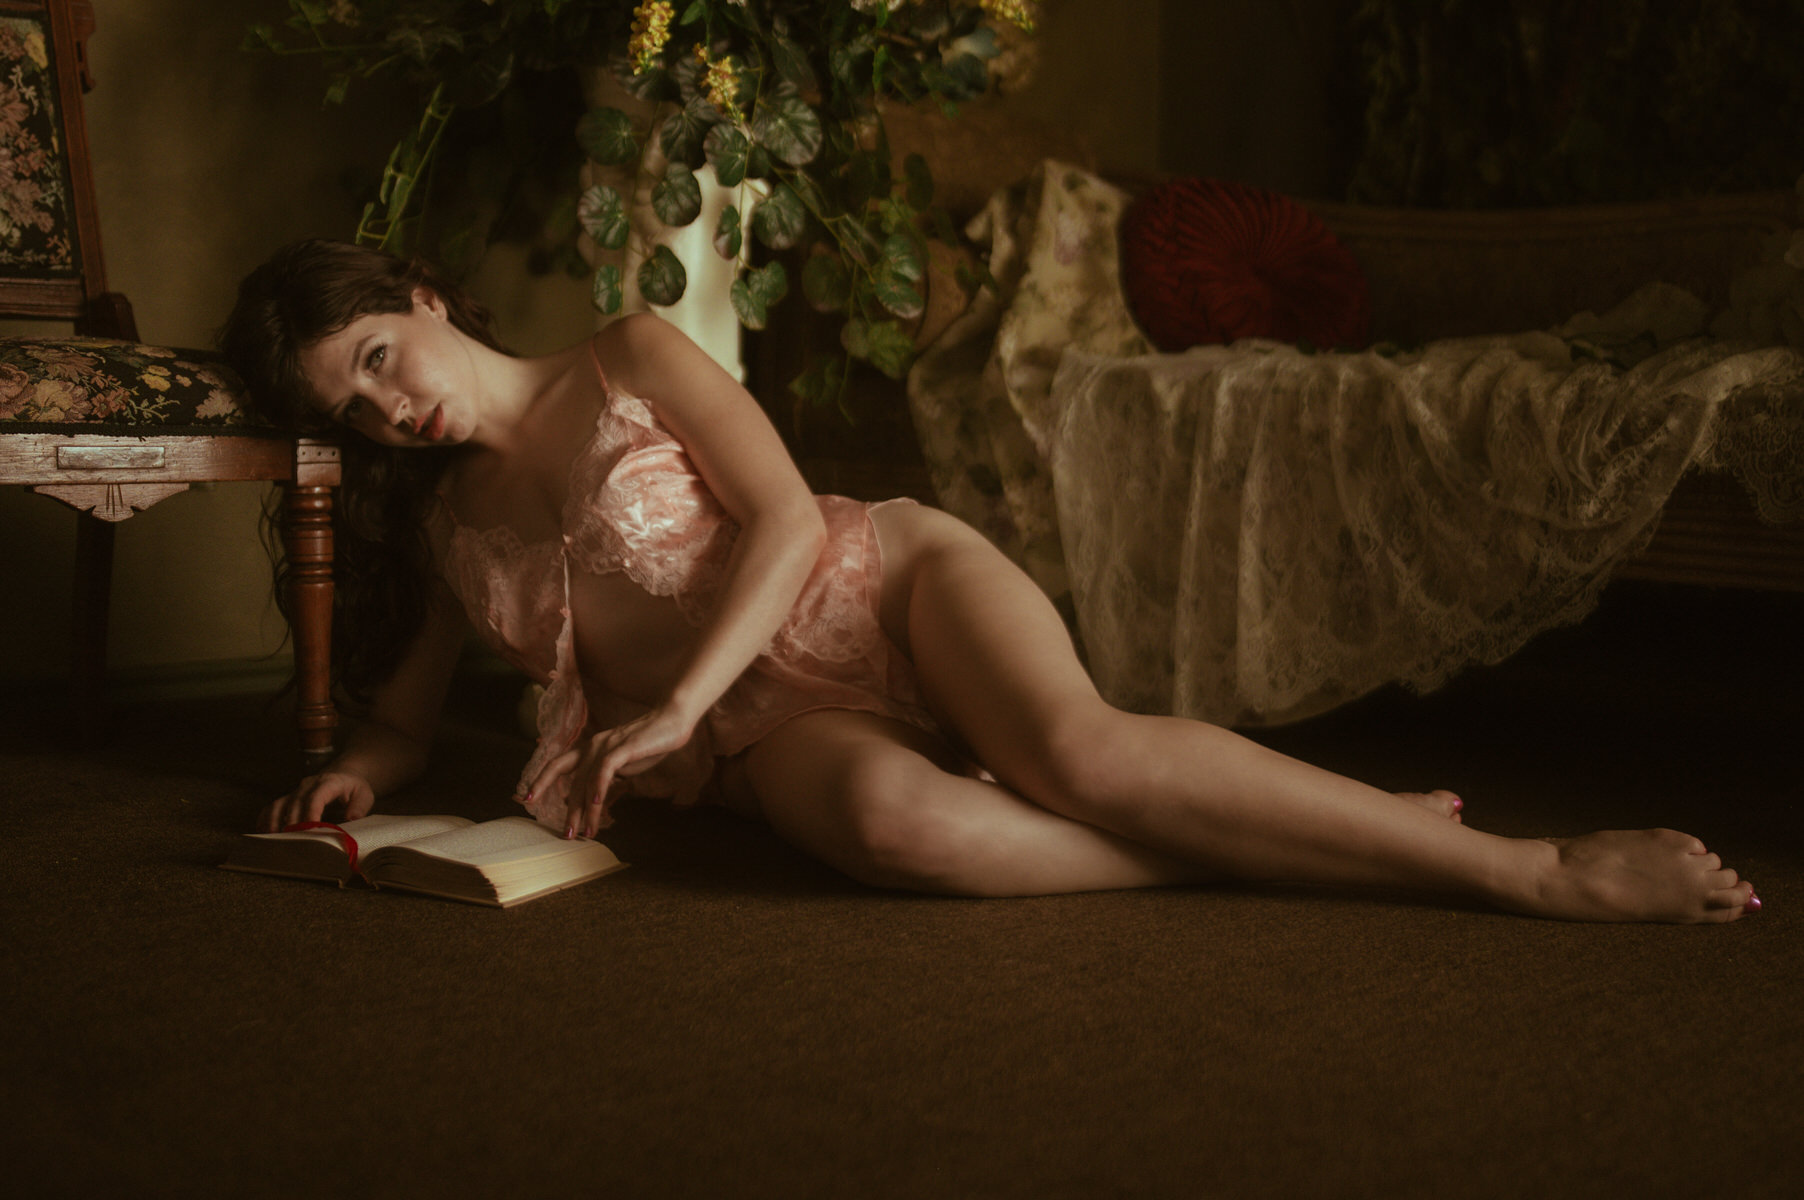 A woman engaged in Dallas Boudoir Photography, laying on the floor reading a book.